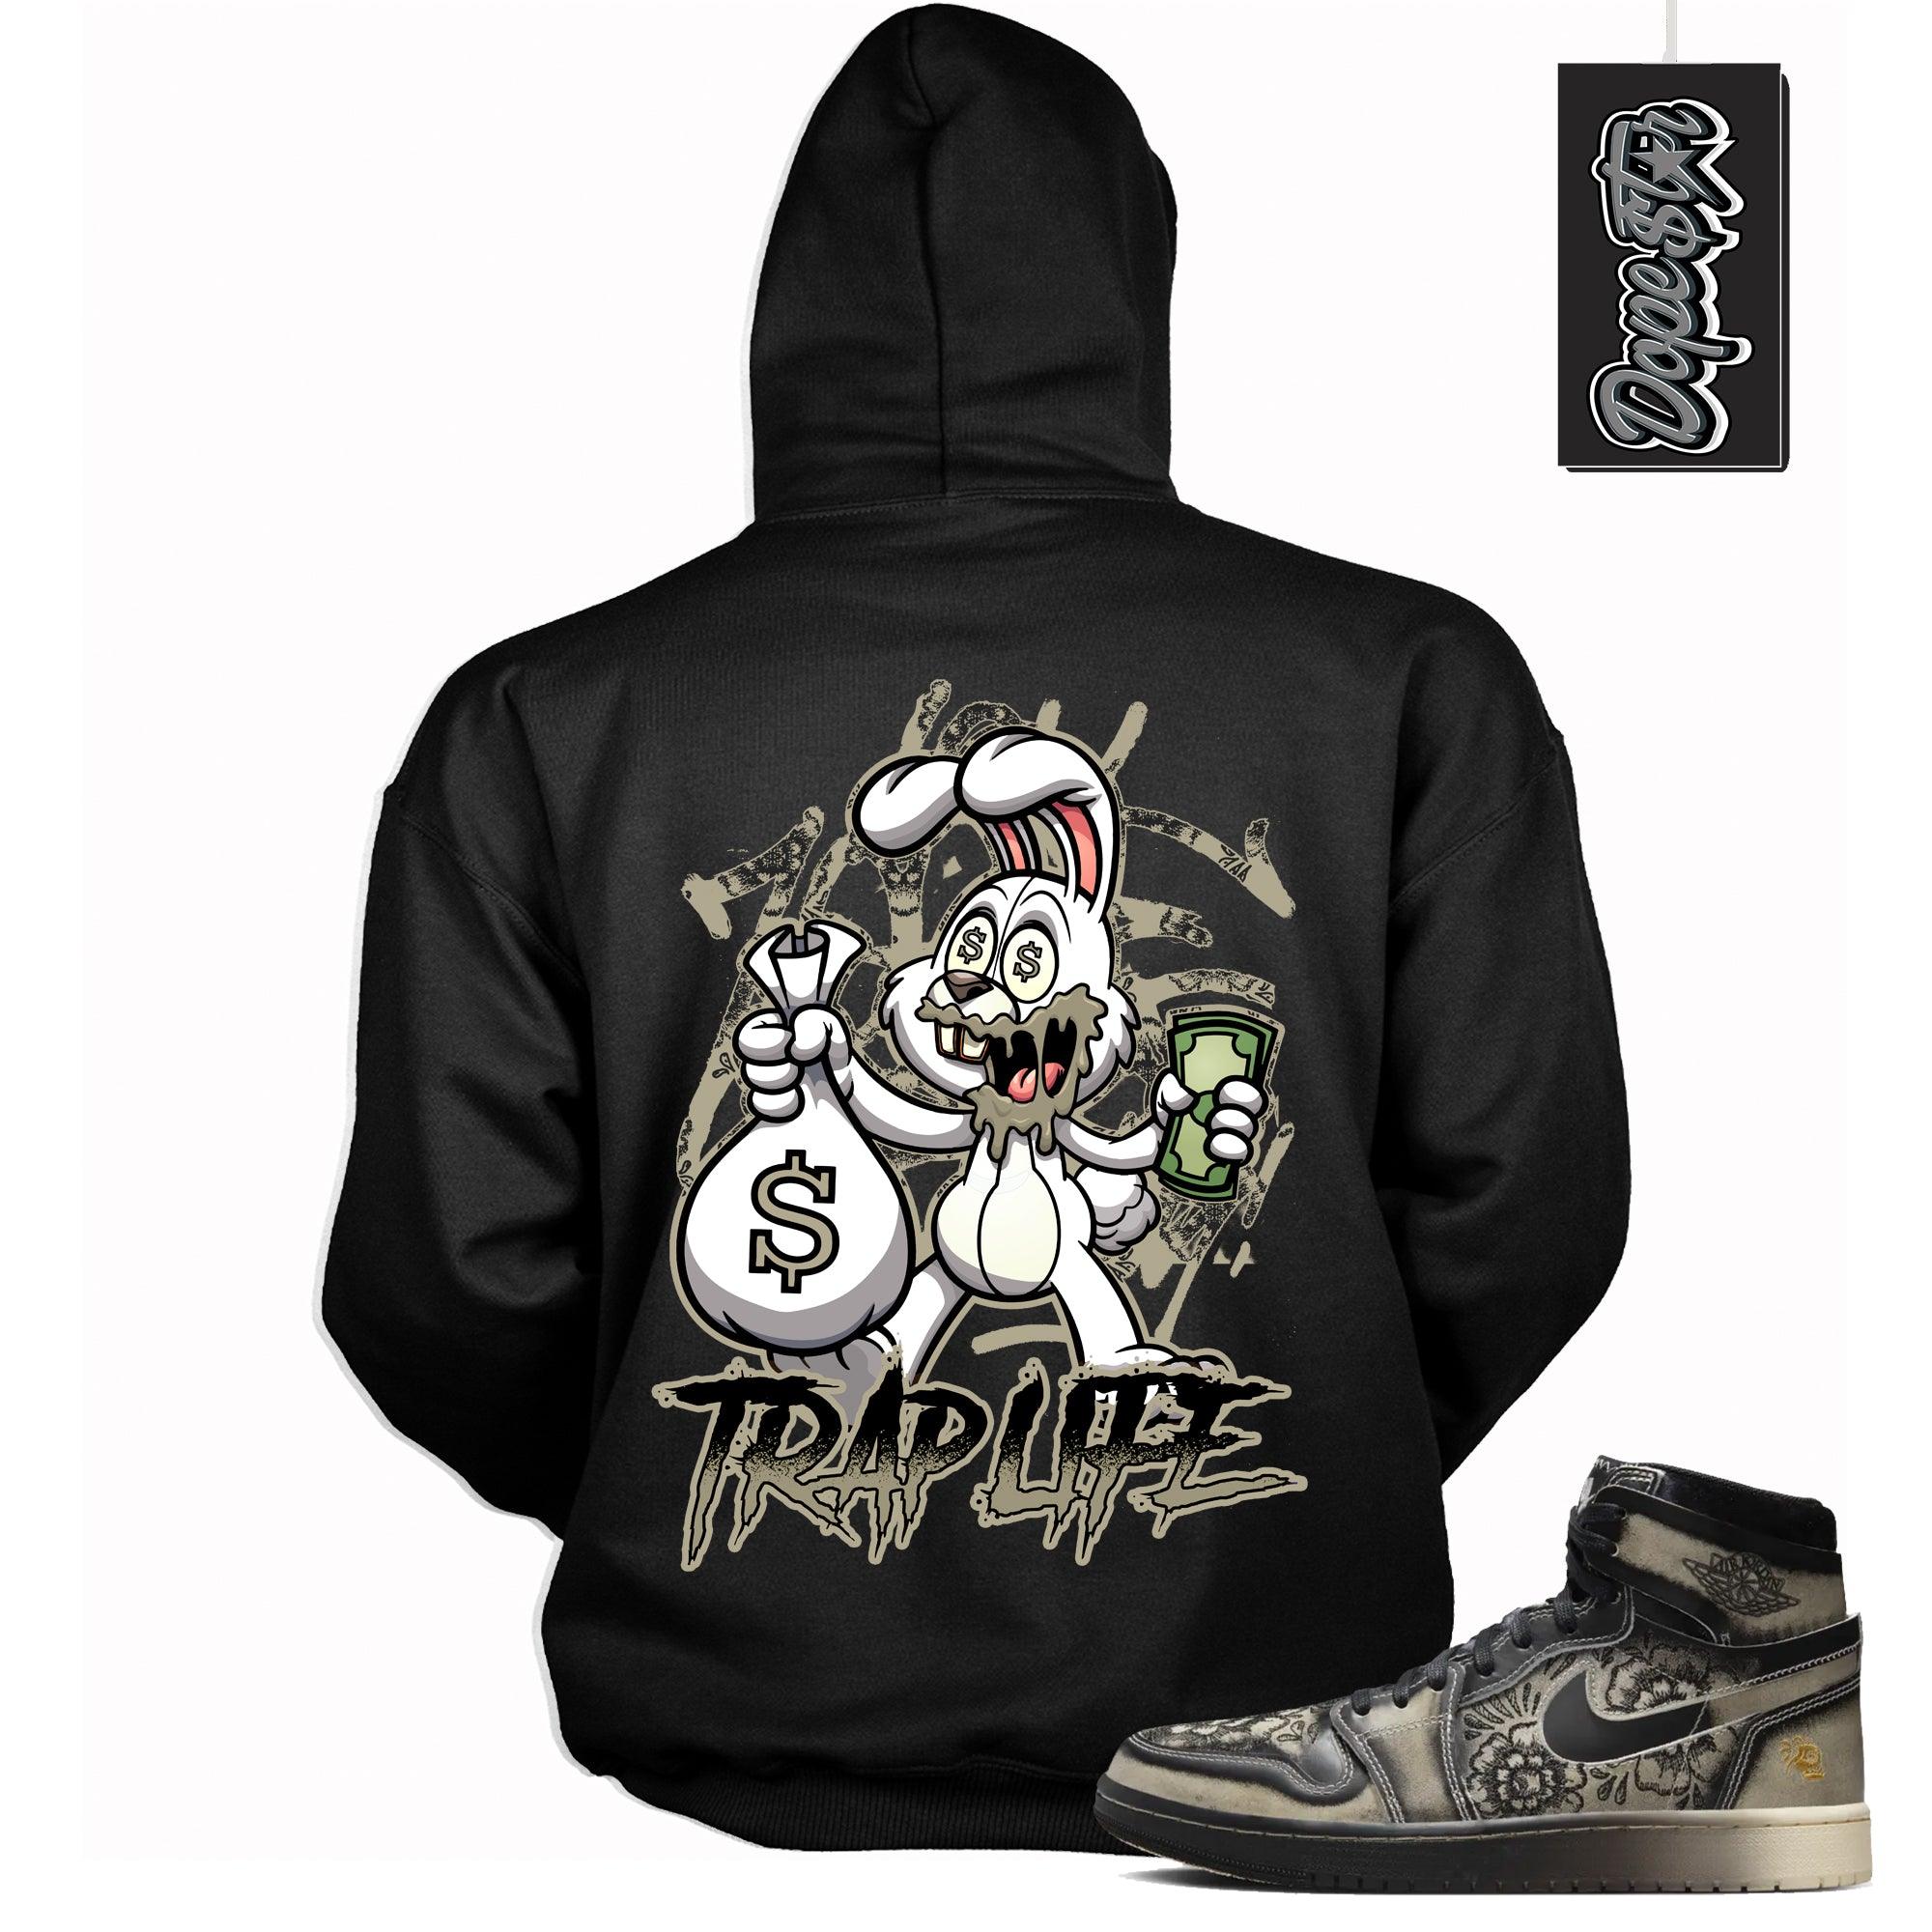 Cool Black Graphic Hoodie with “ Trap Rabbit“ print, that perfectly matches Air Jordan 1 High Zoom Comfort 2 Dia de Muertos Black and Pale Ivory sneakers